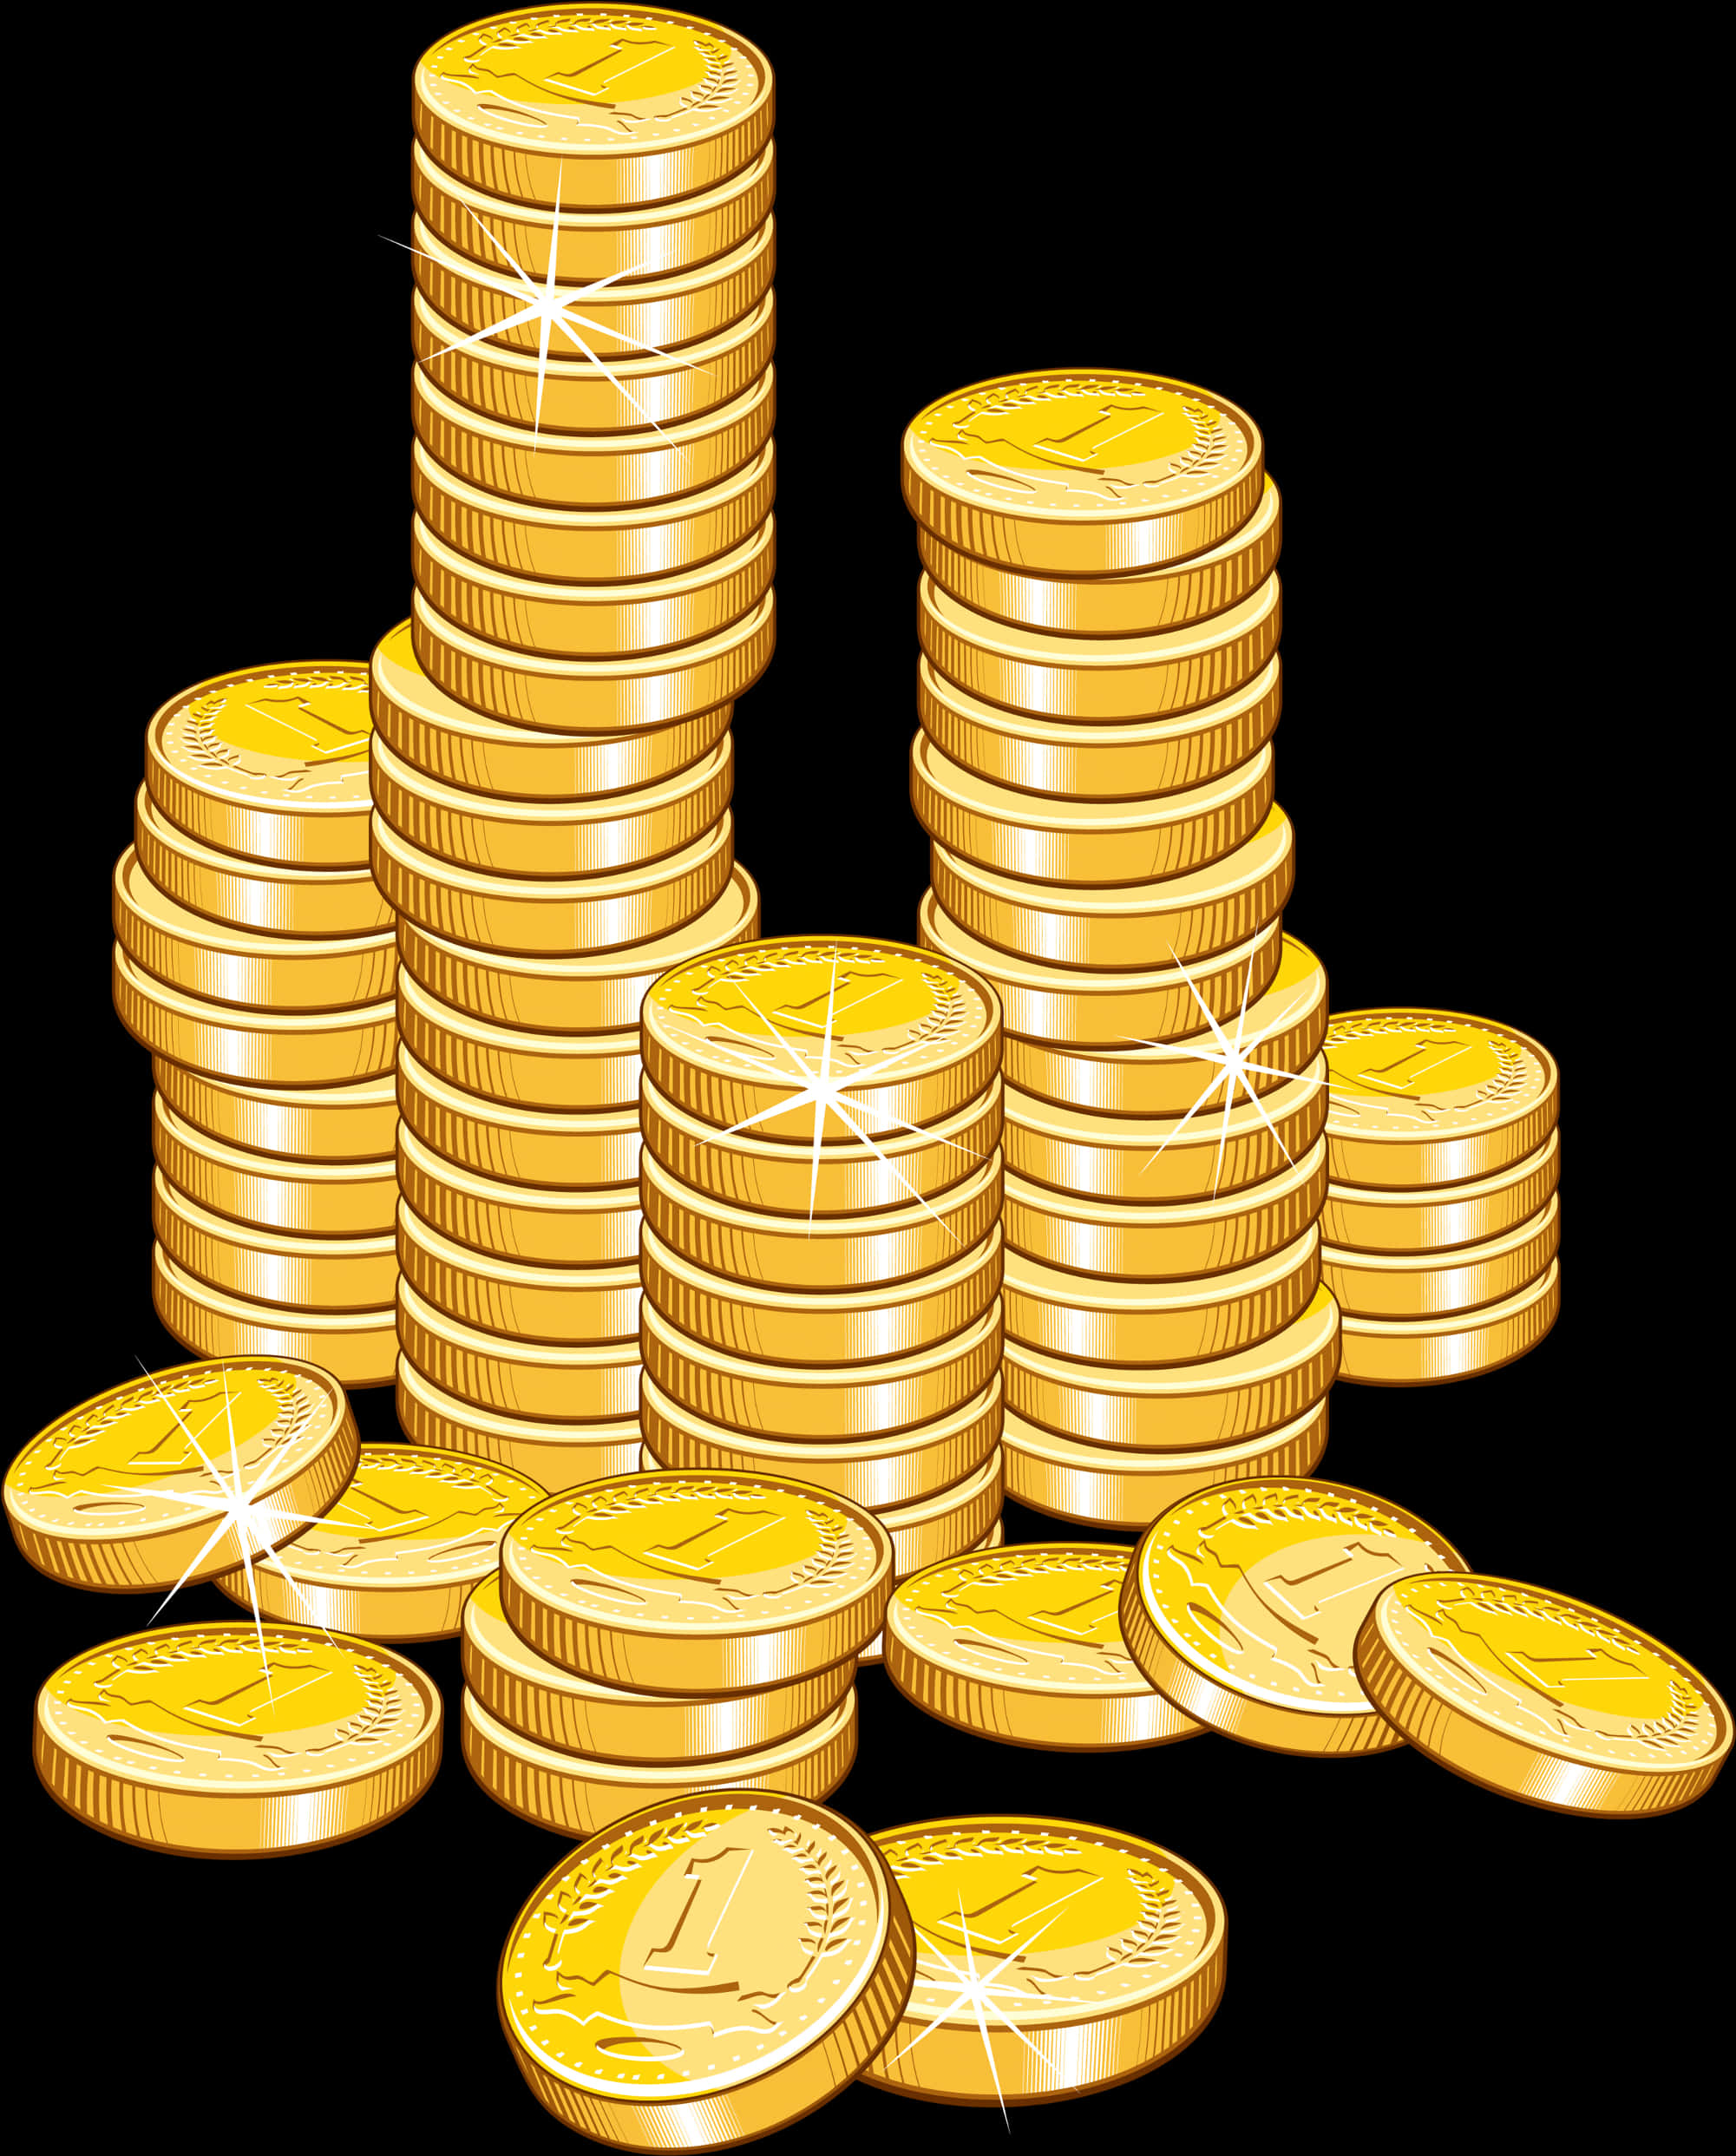 Shimmering Gold Coins Stacked PNG image